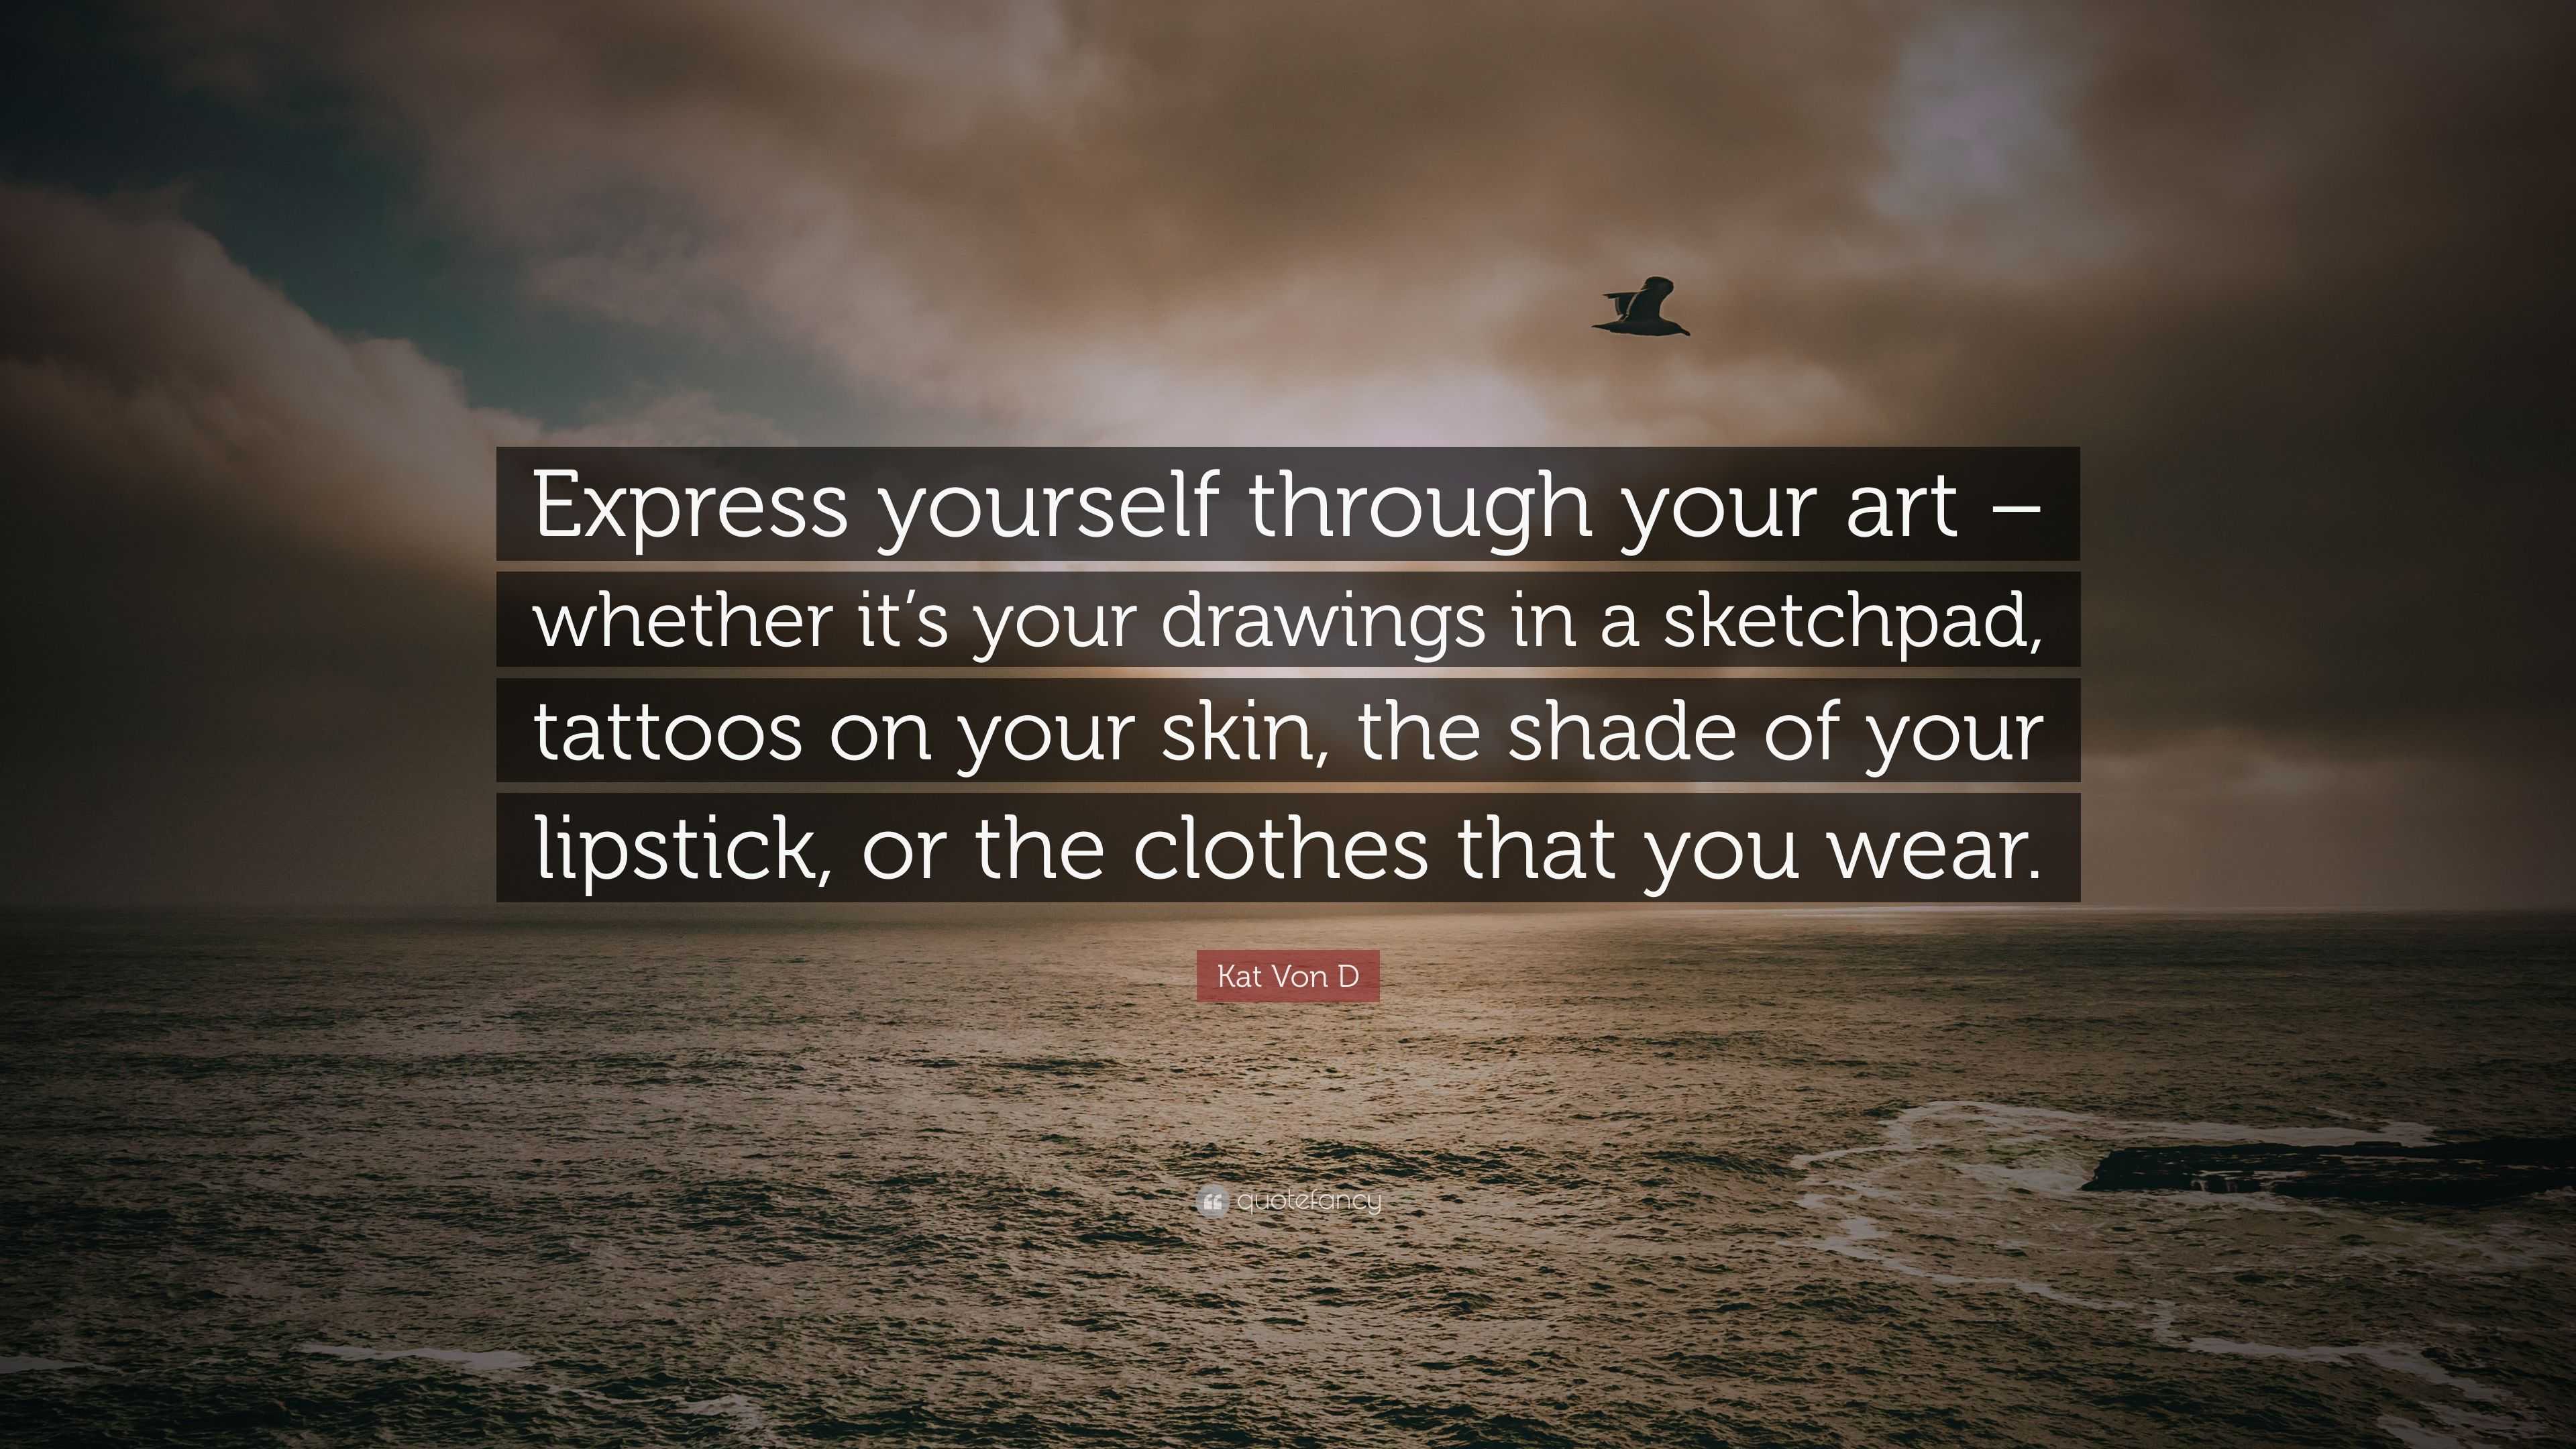 Kat Von D Quote: "Express yourself through your art - whether it's your drawings in a sketchpad ...